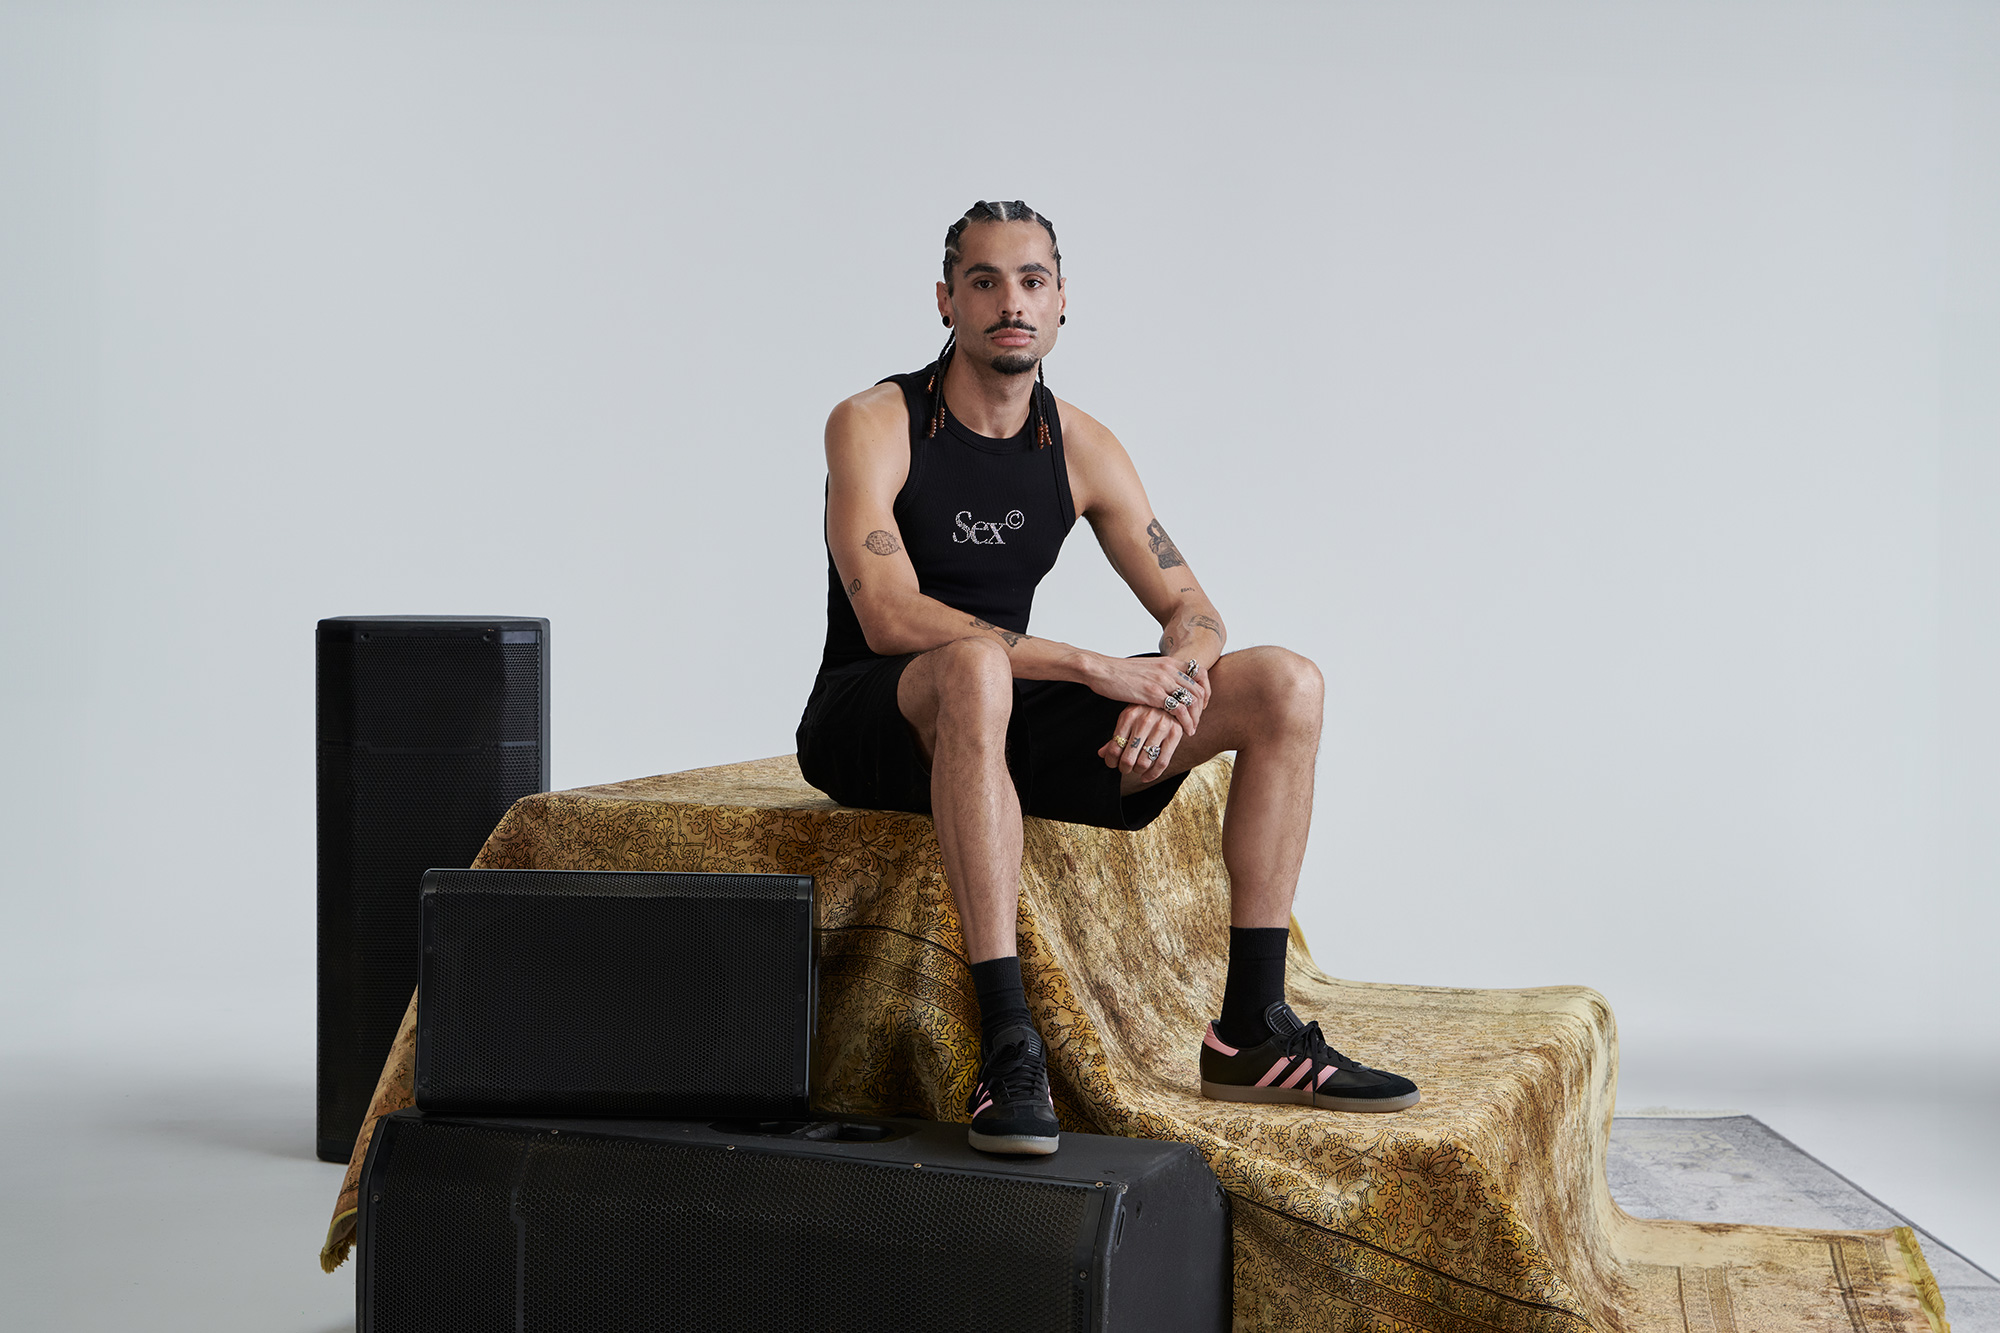 A man wearing a black tank top and shorts sits on a carpet and large speakers